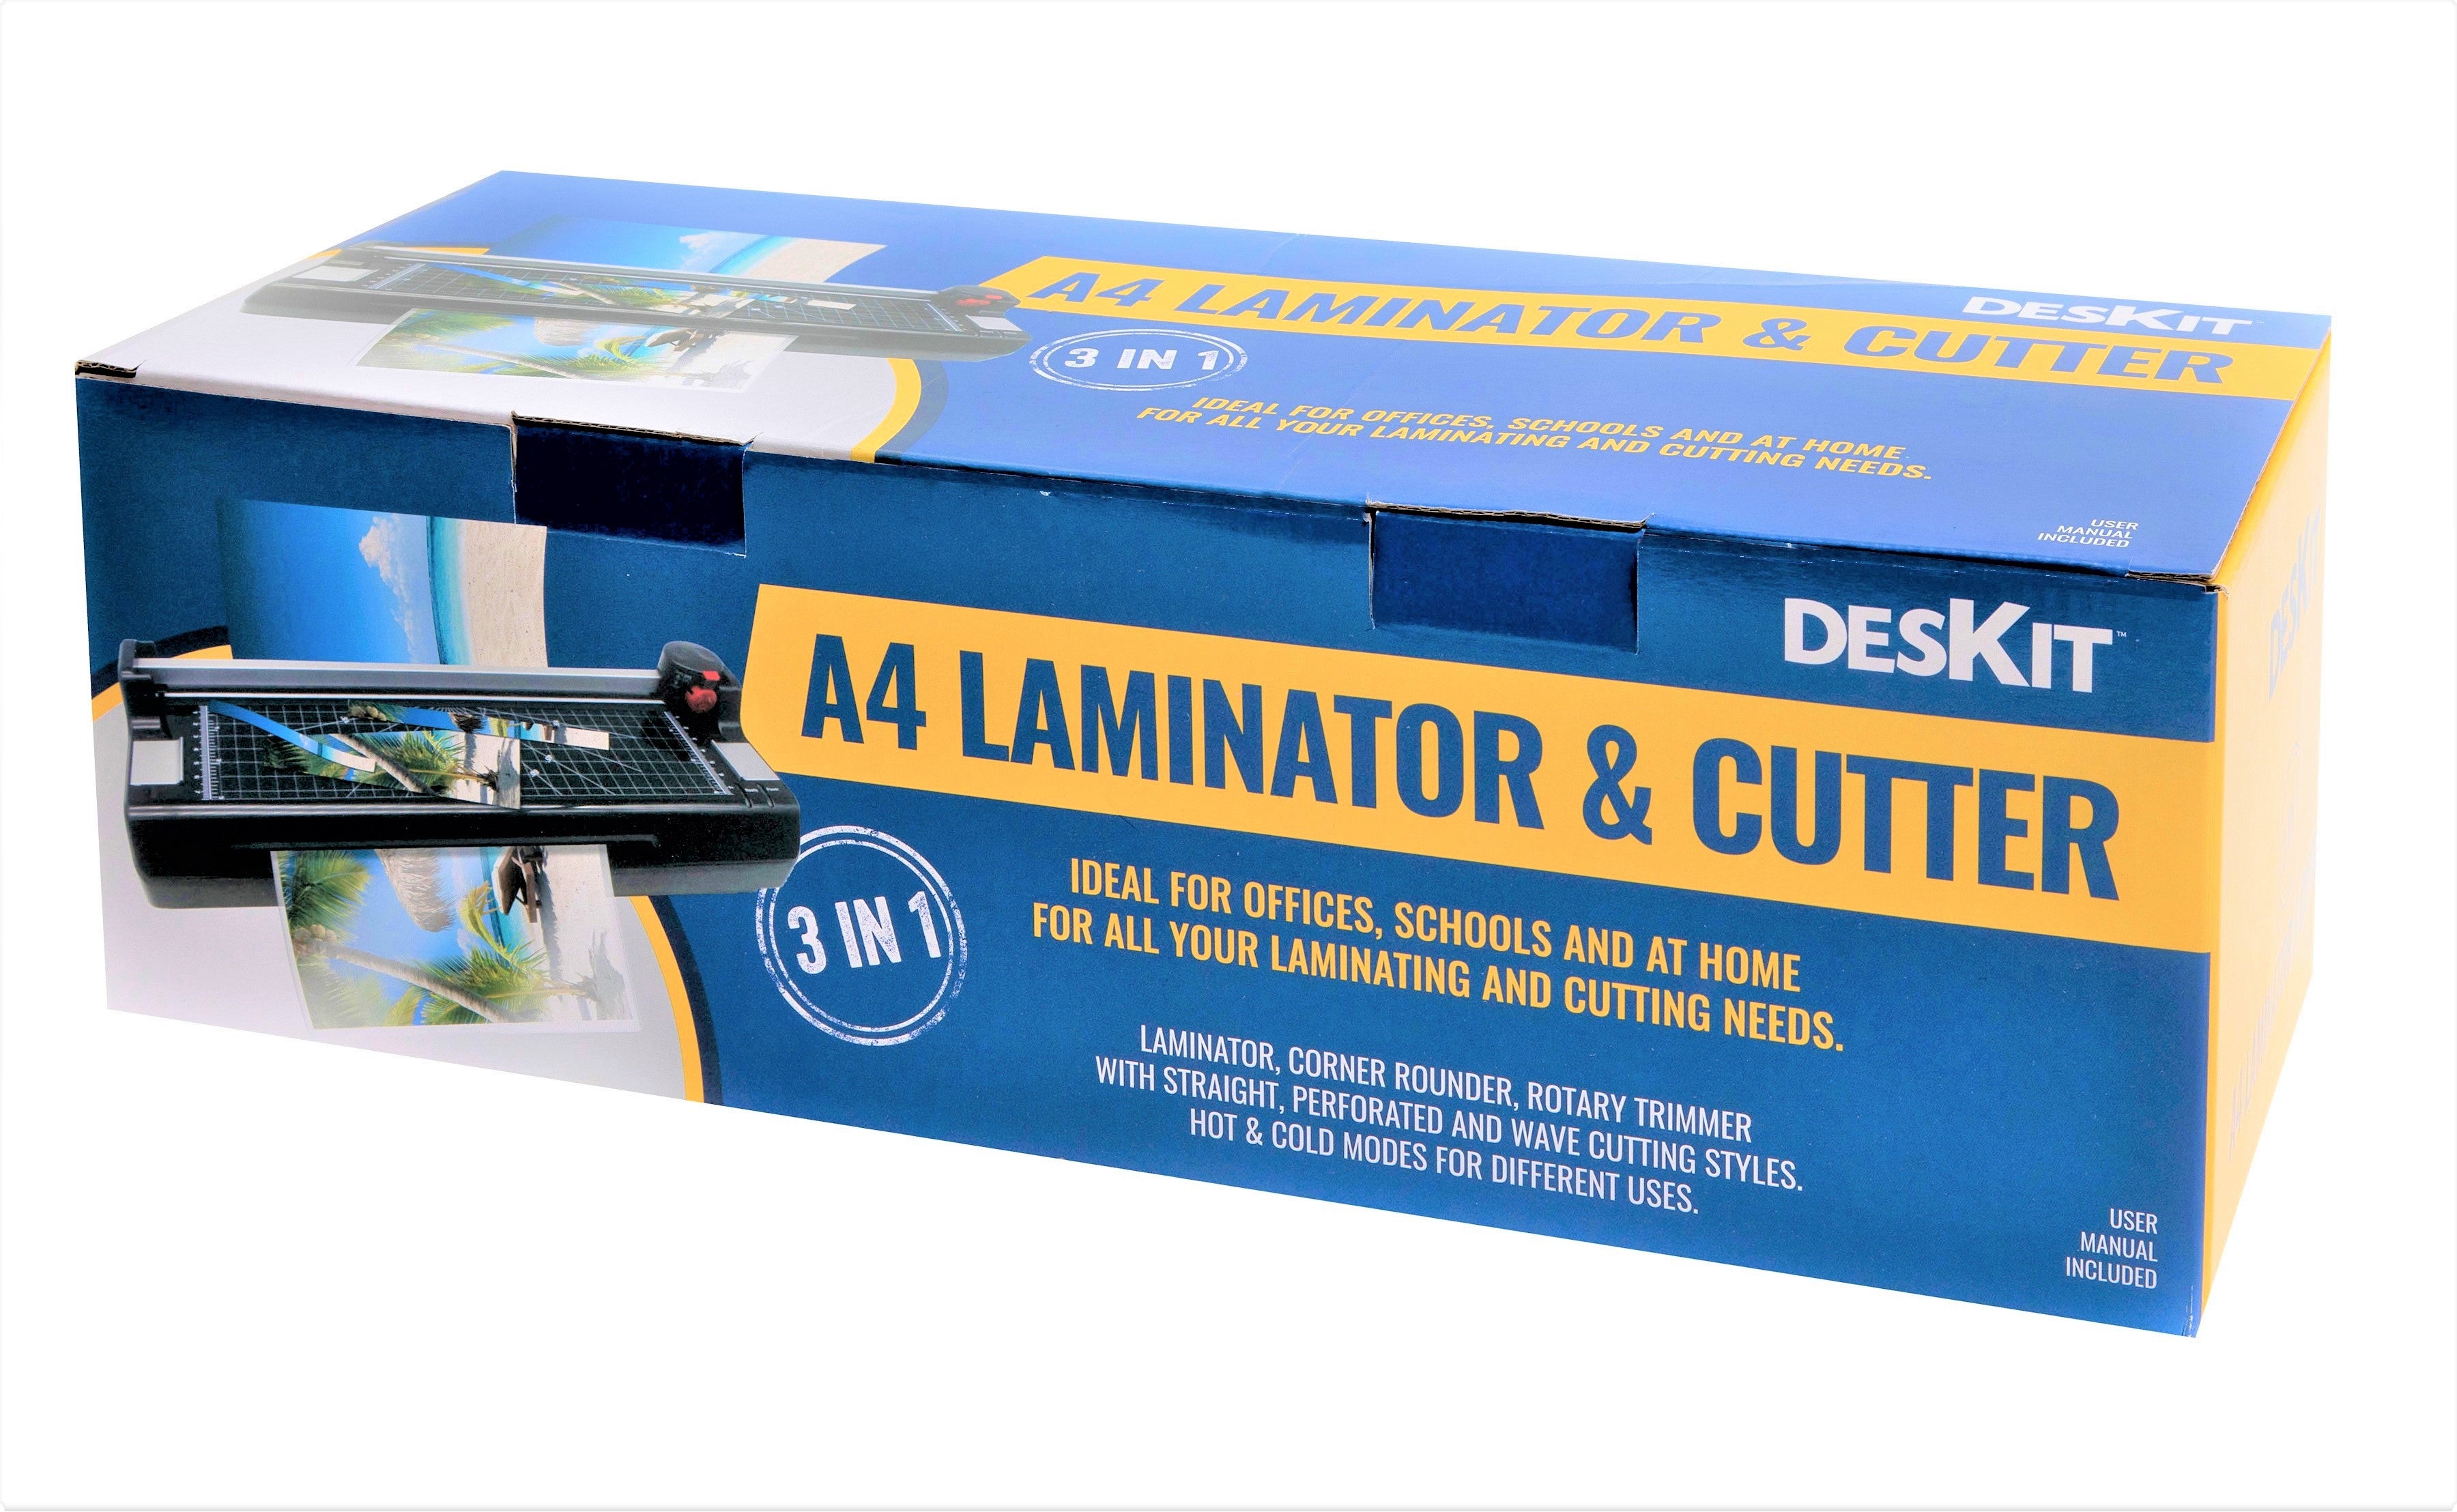 Deskit Laminating Pouches A4 Gloss 150 Microns for Home and Office